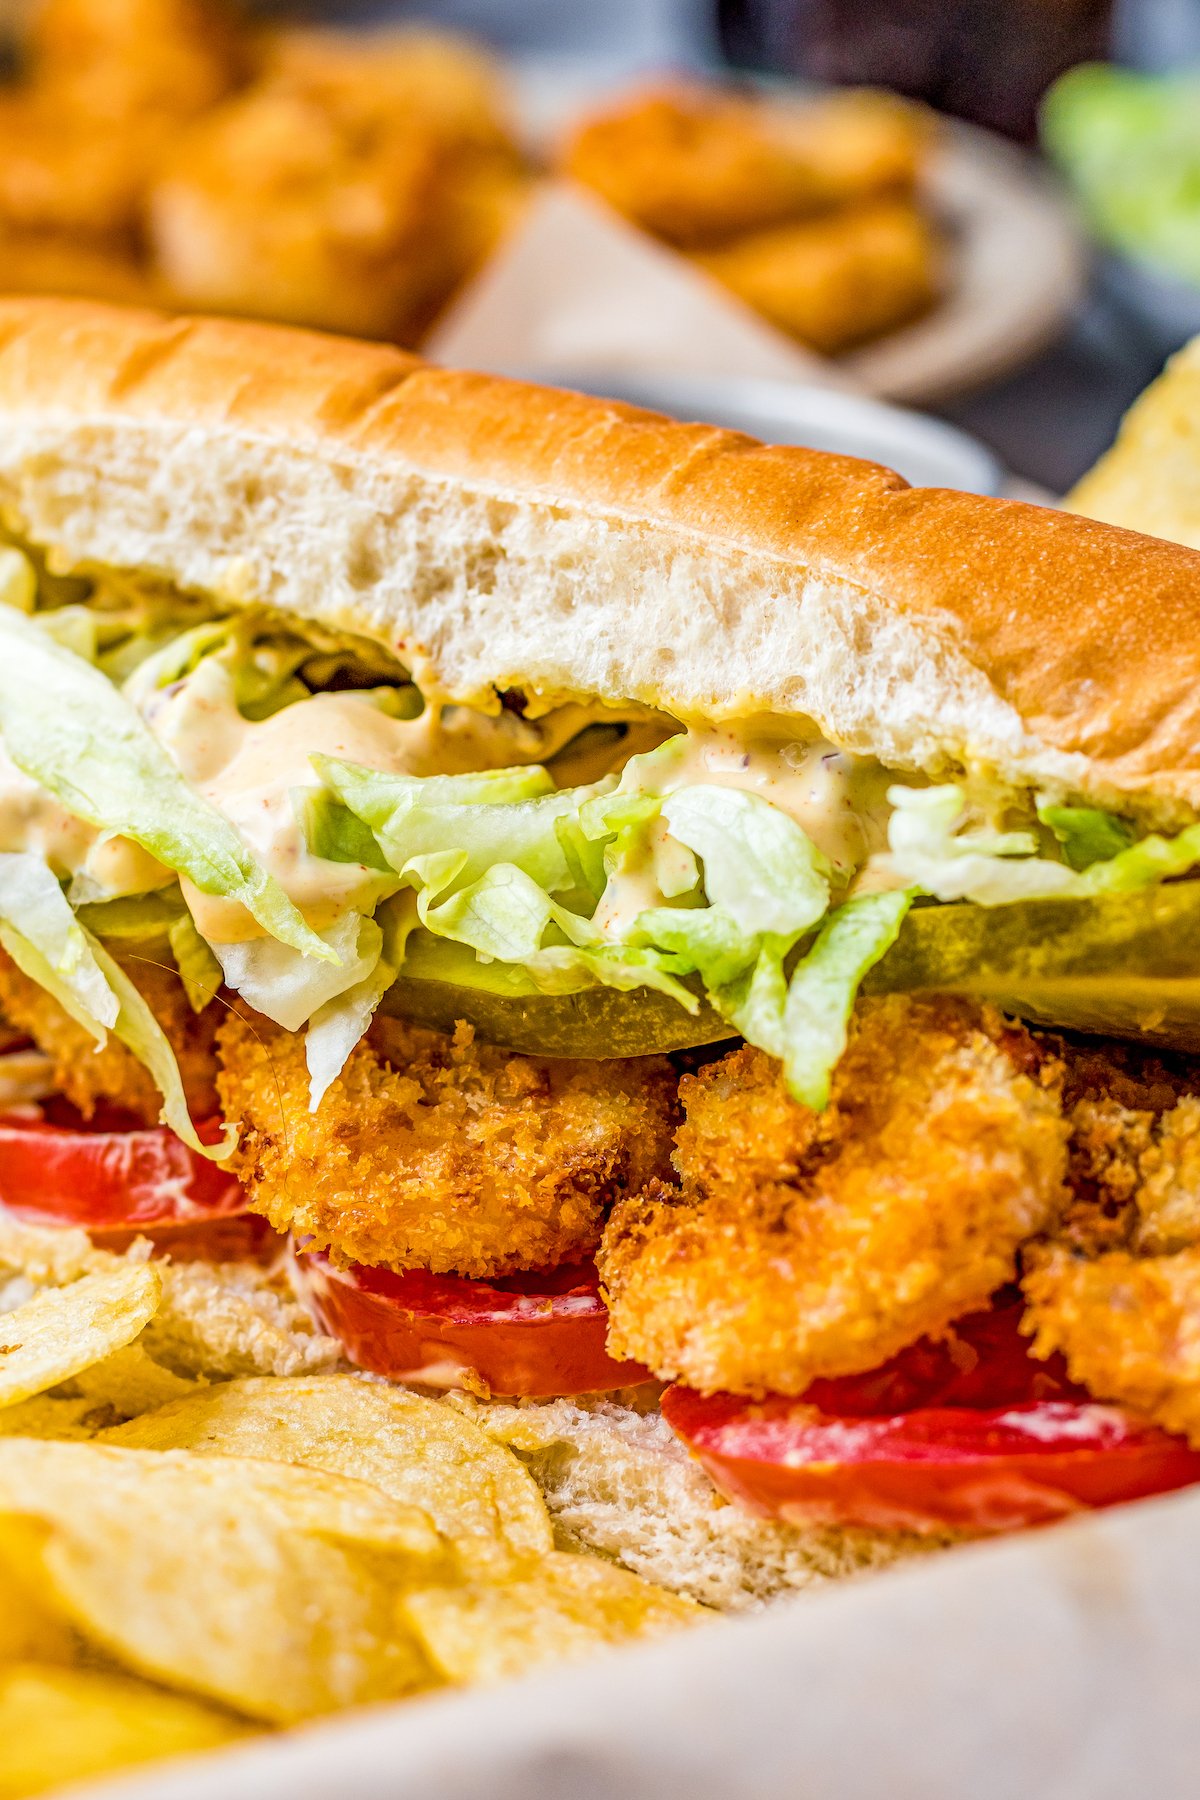 A shrimp sandwich with lettuce and tomato.